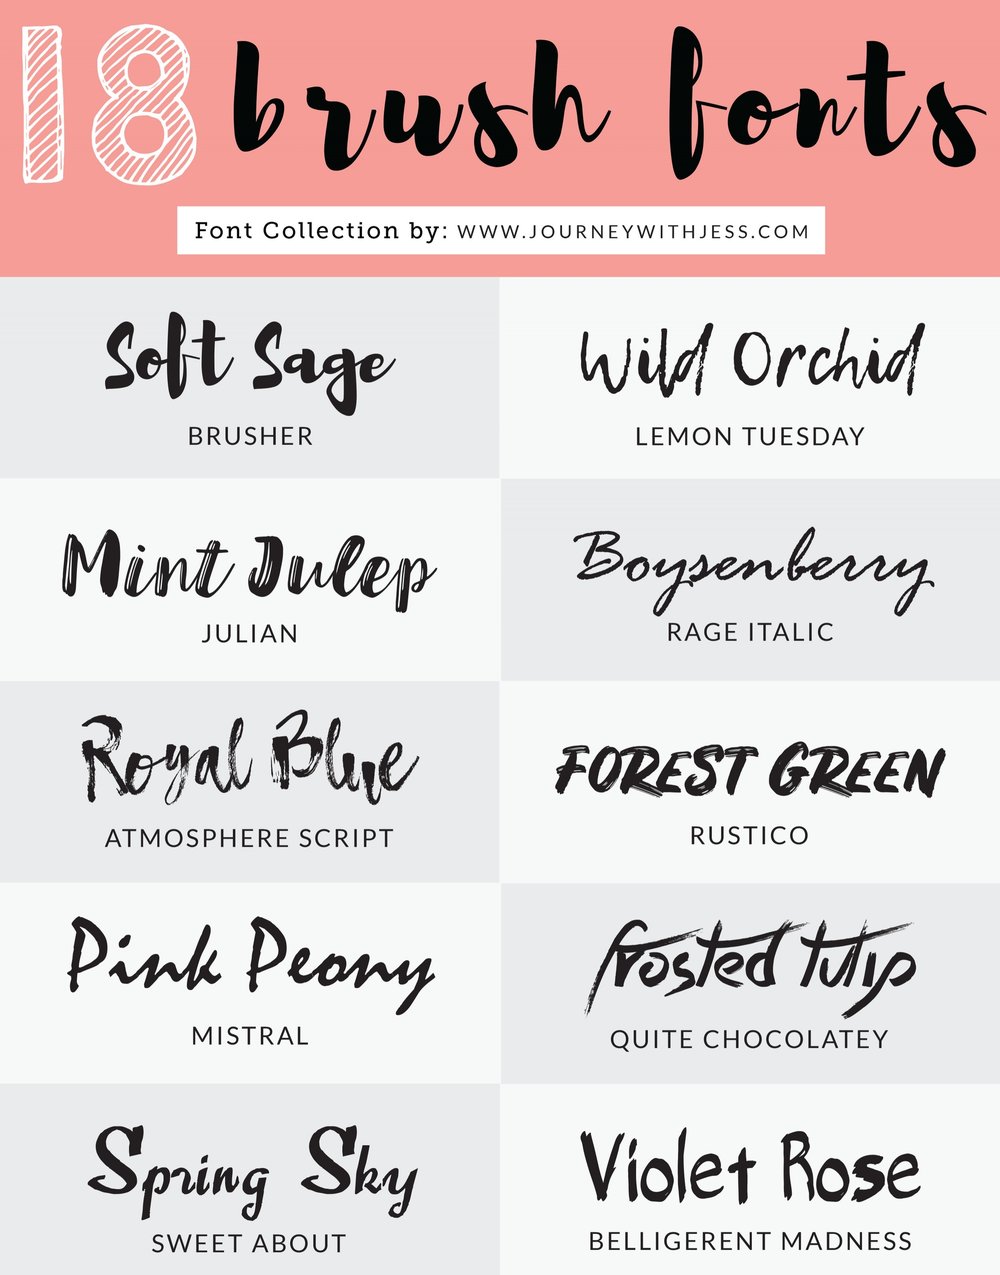 Download Free Font Collection 18 Brush Fonts Journey With Jess Inspiration For Your Creative Side